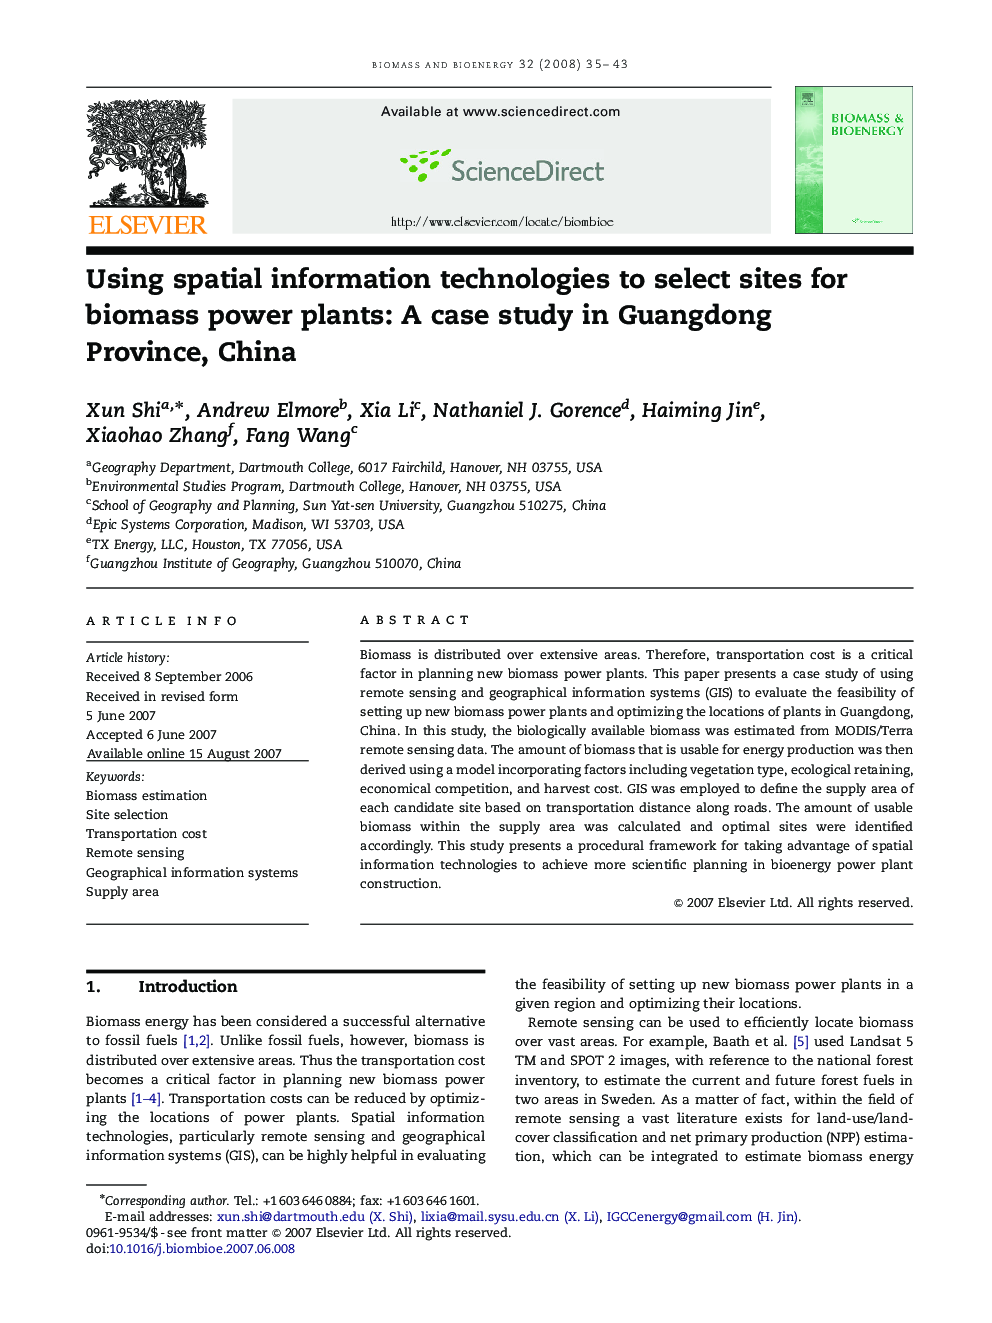 Using spatial information technologies to select sites for biomass power plants: A case study in Guangdong Province, China